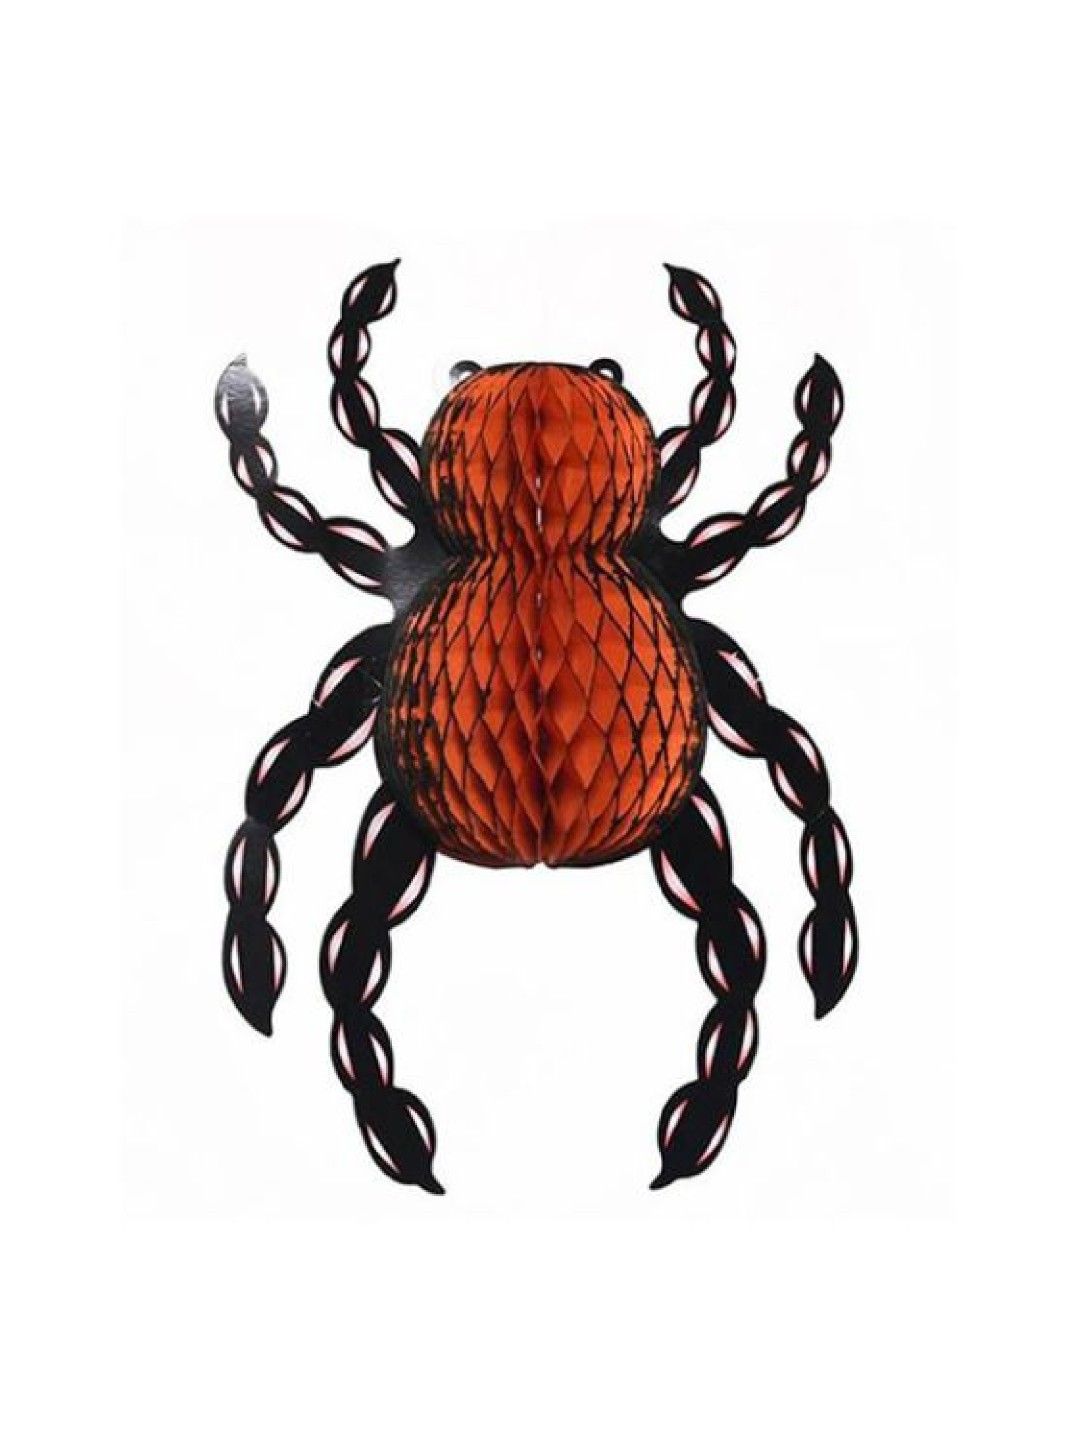 Elves of the Party Halloween Decor: Black Spider